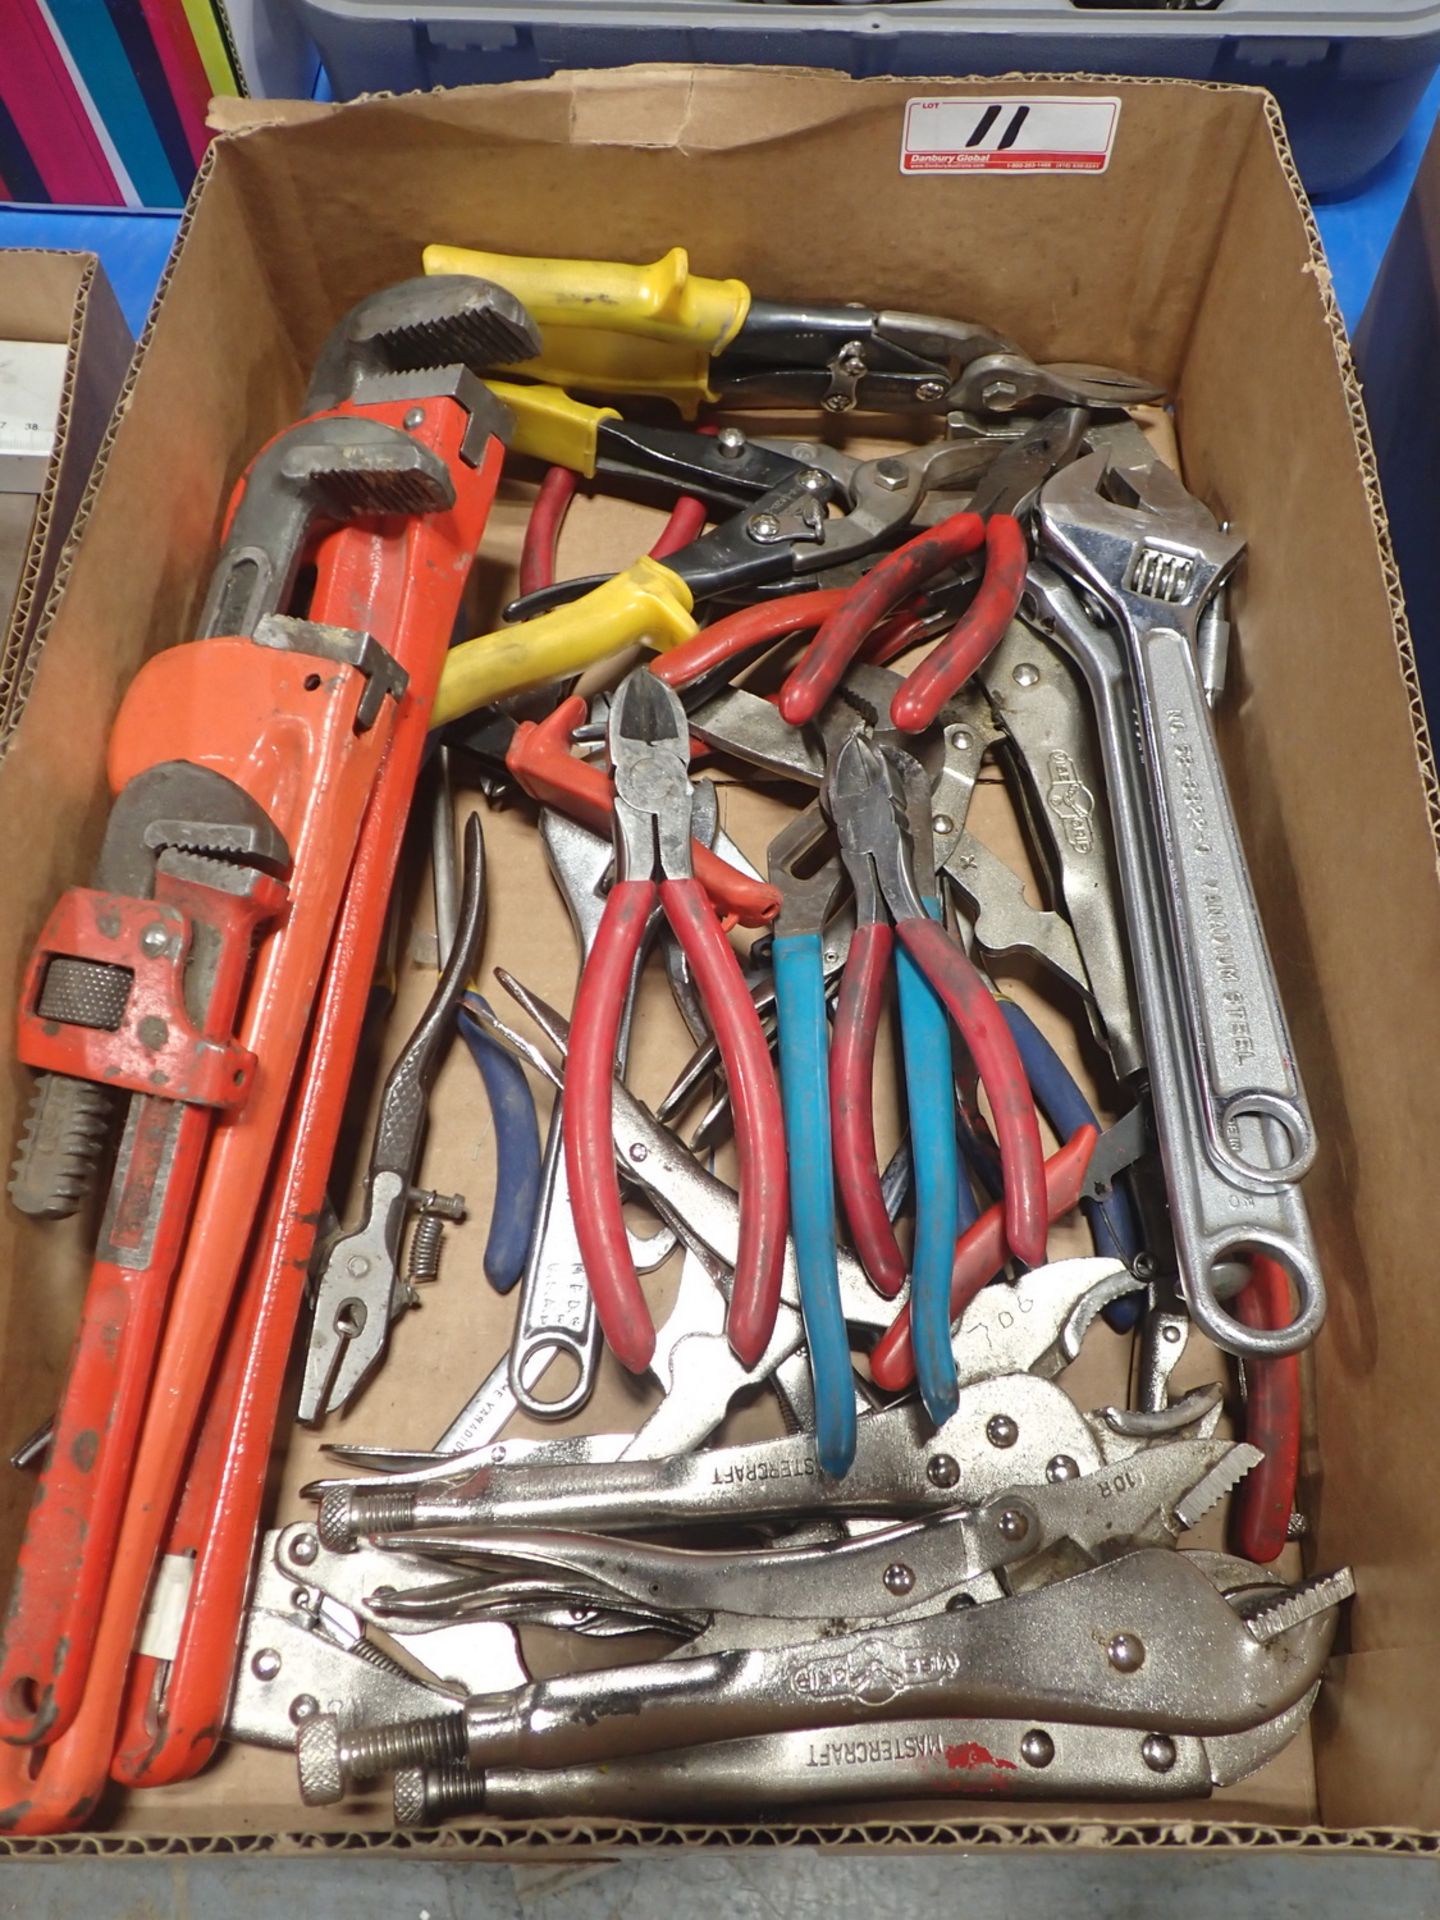 LOT - PIPE WRENCHES, VISE GRIPS, & ASSTD PLIERS